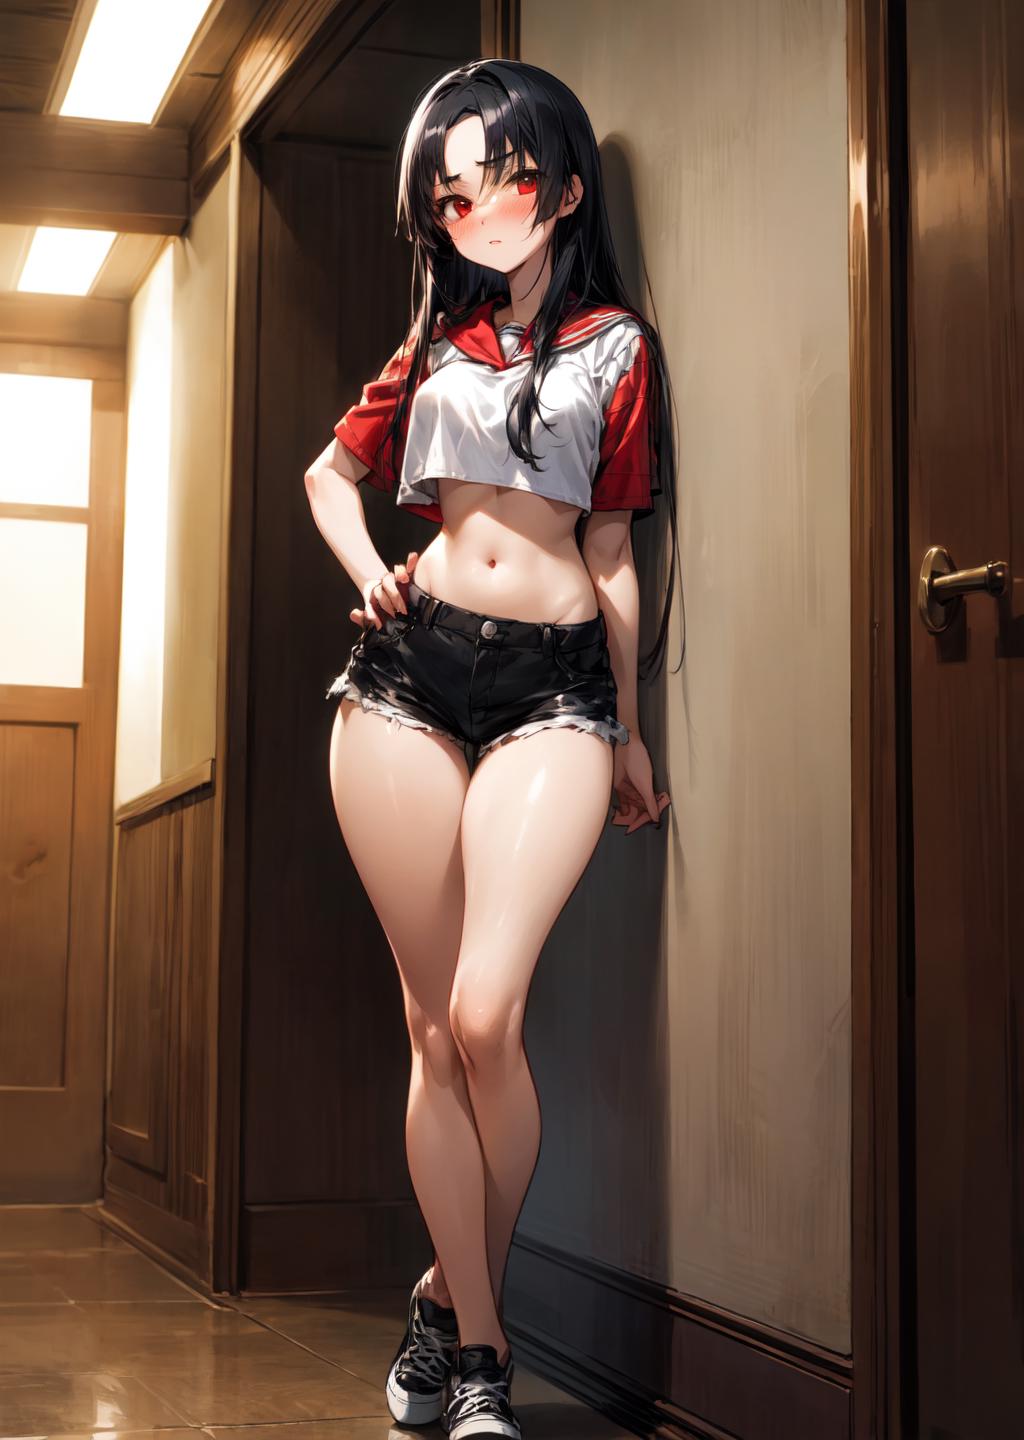 A cartoon anime girl with red eyes and red lips is wearing a white and red top and jean shorts. She is standing in a hallway and leaning against a door.